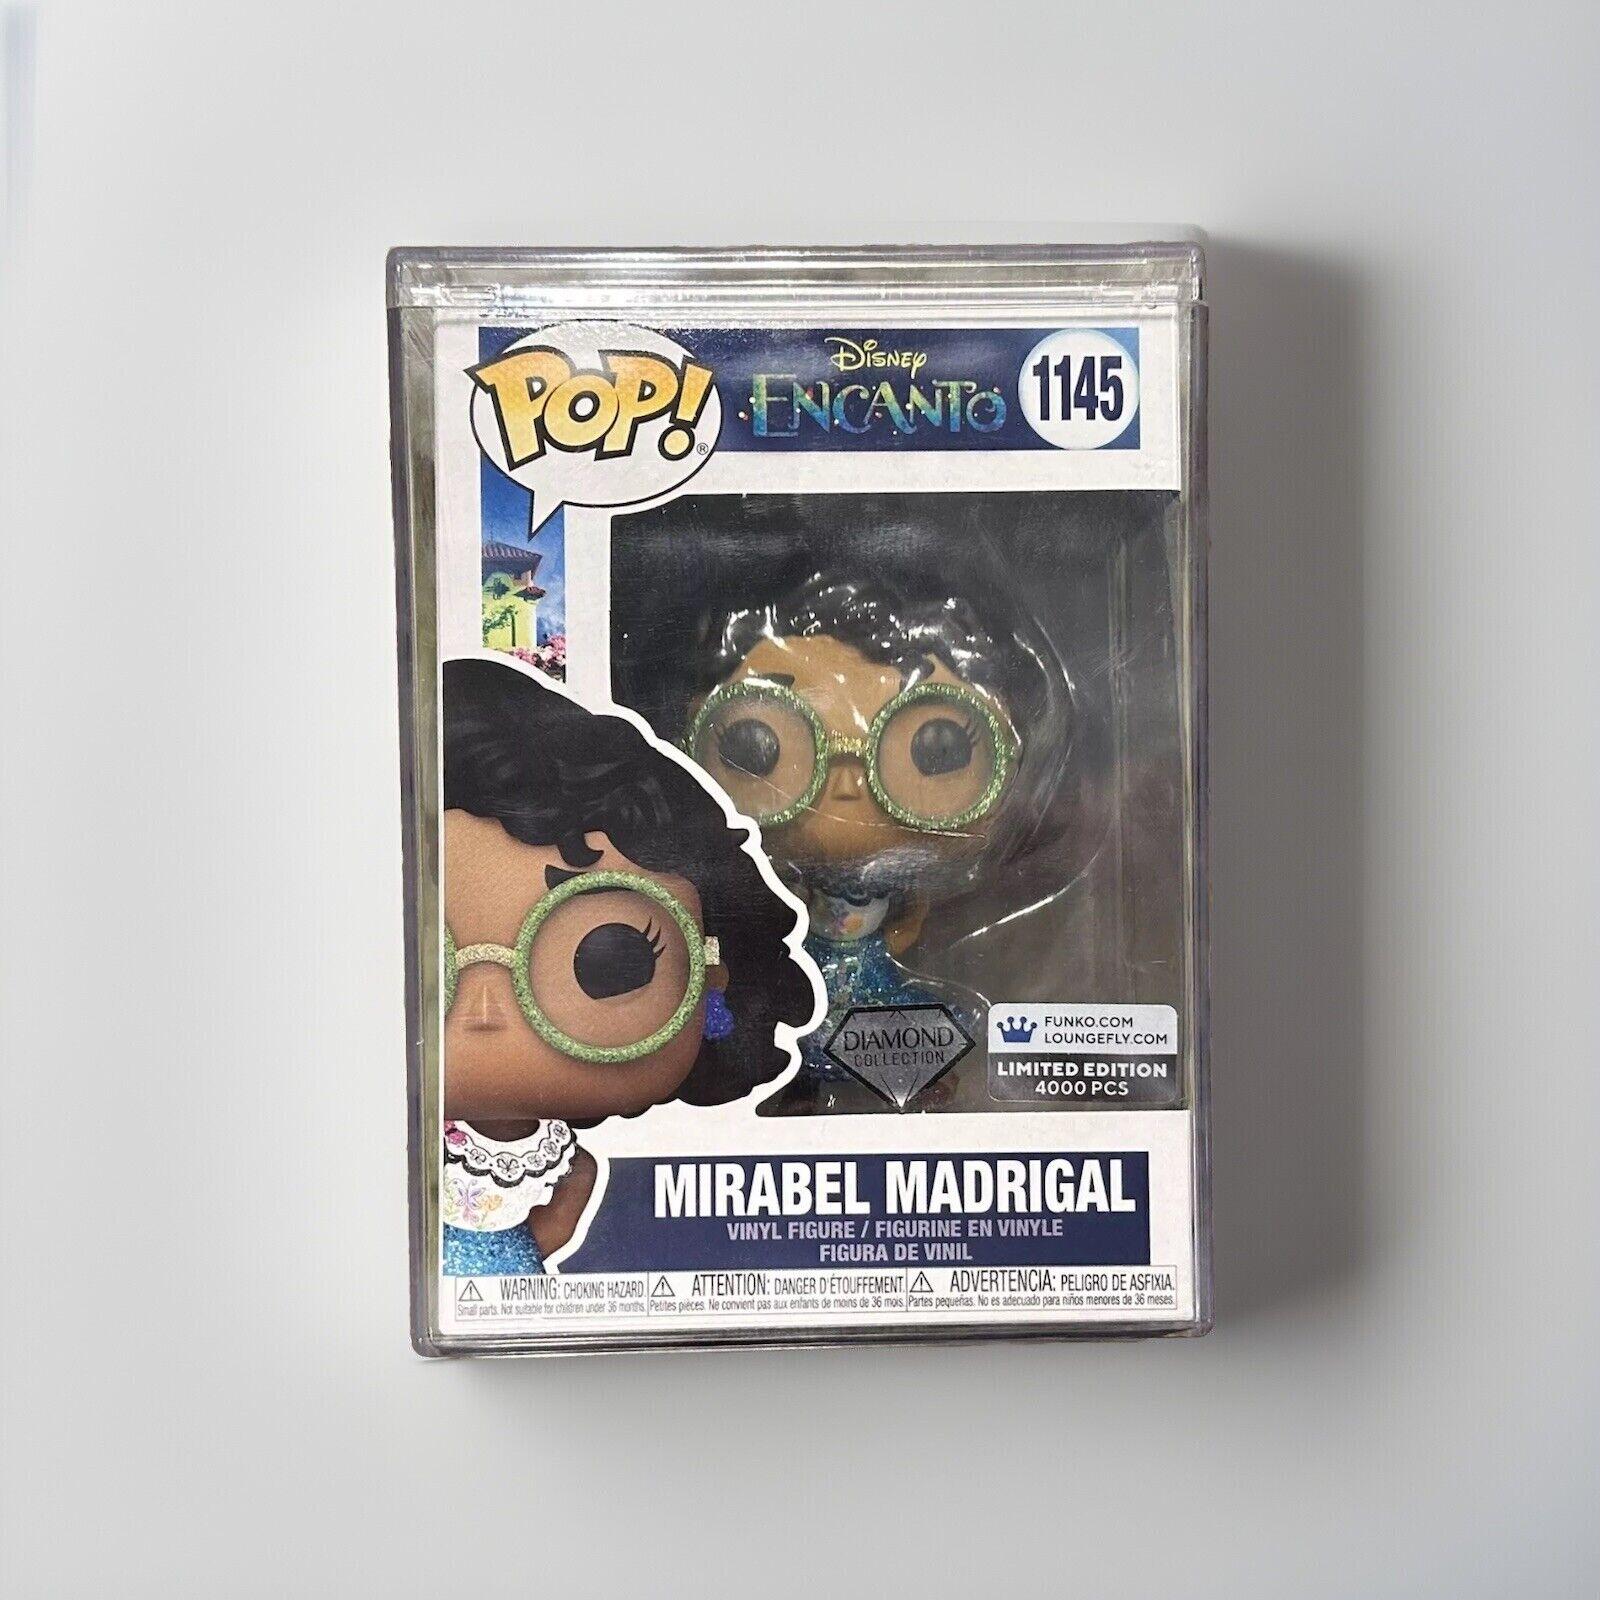 Funko Pop Encanto Mirabel Madrigal #1145 Diamond   Loungefly LE 4000 Only